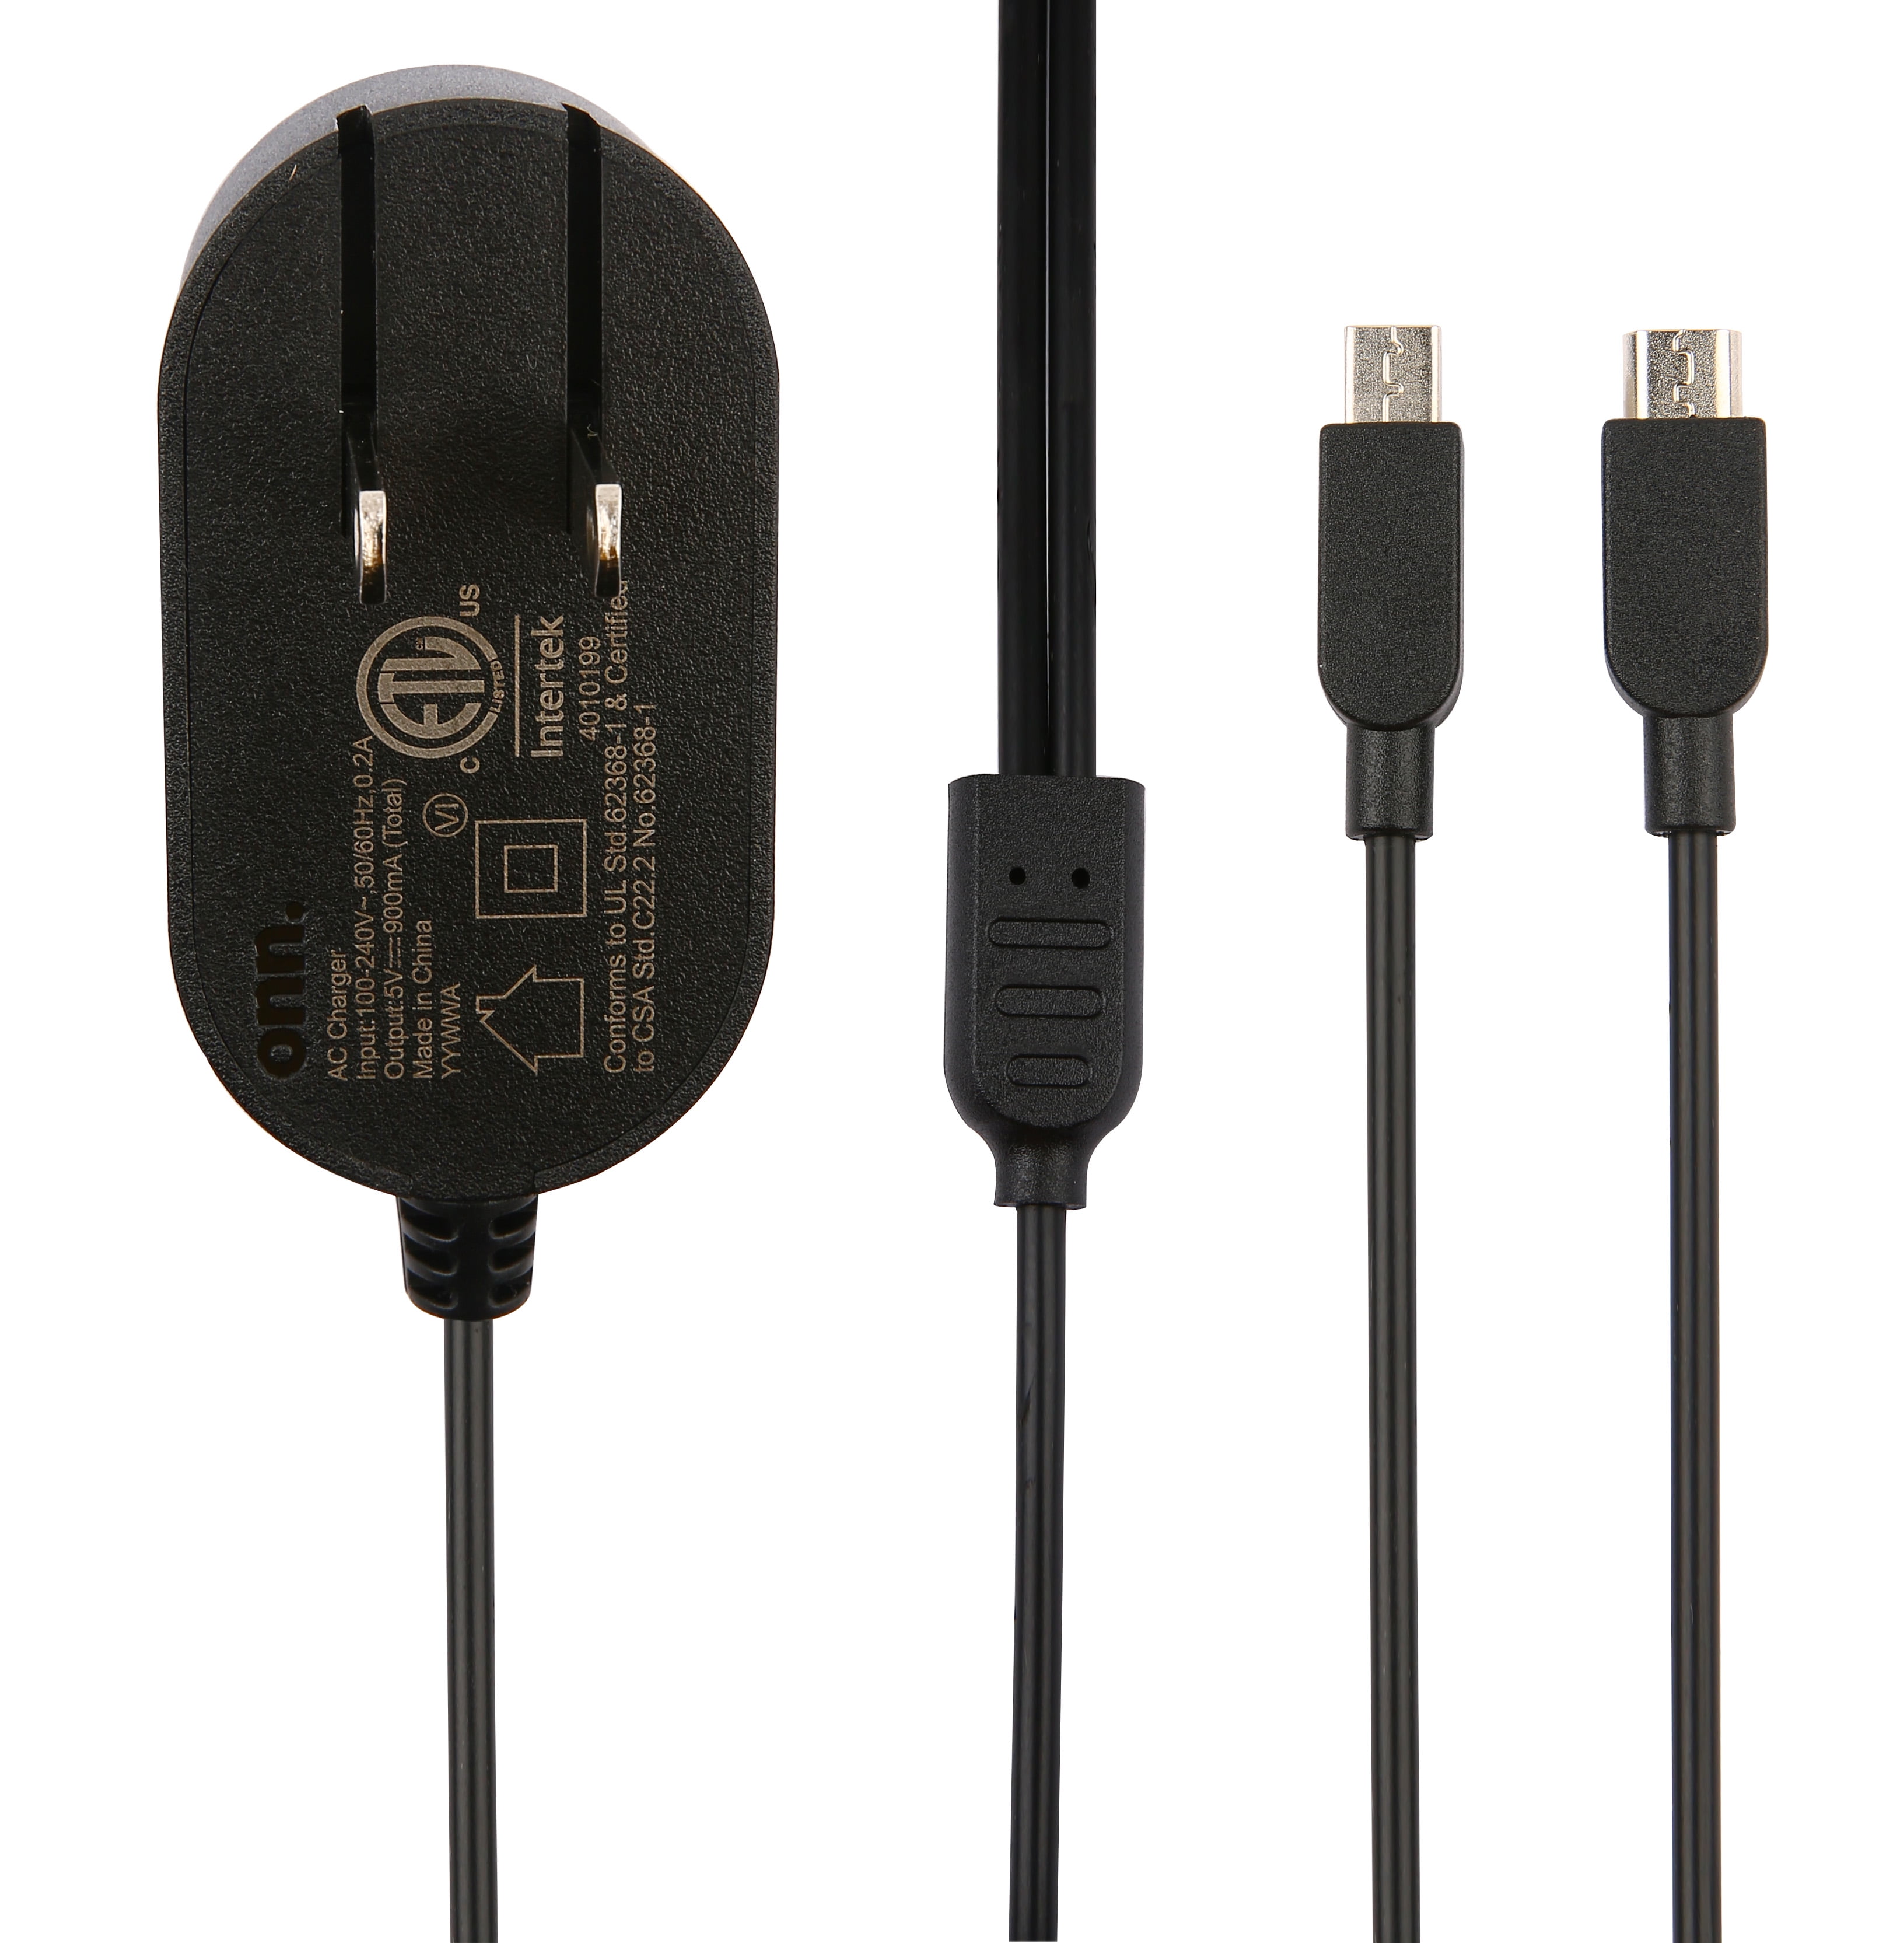 Onn 2.0 Wall Charger 5ft